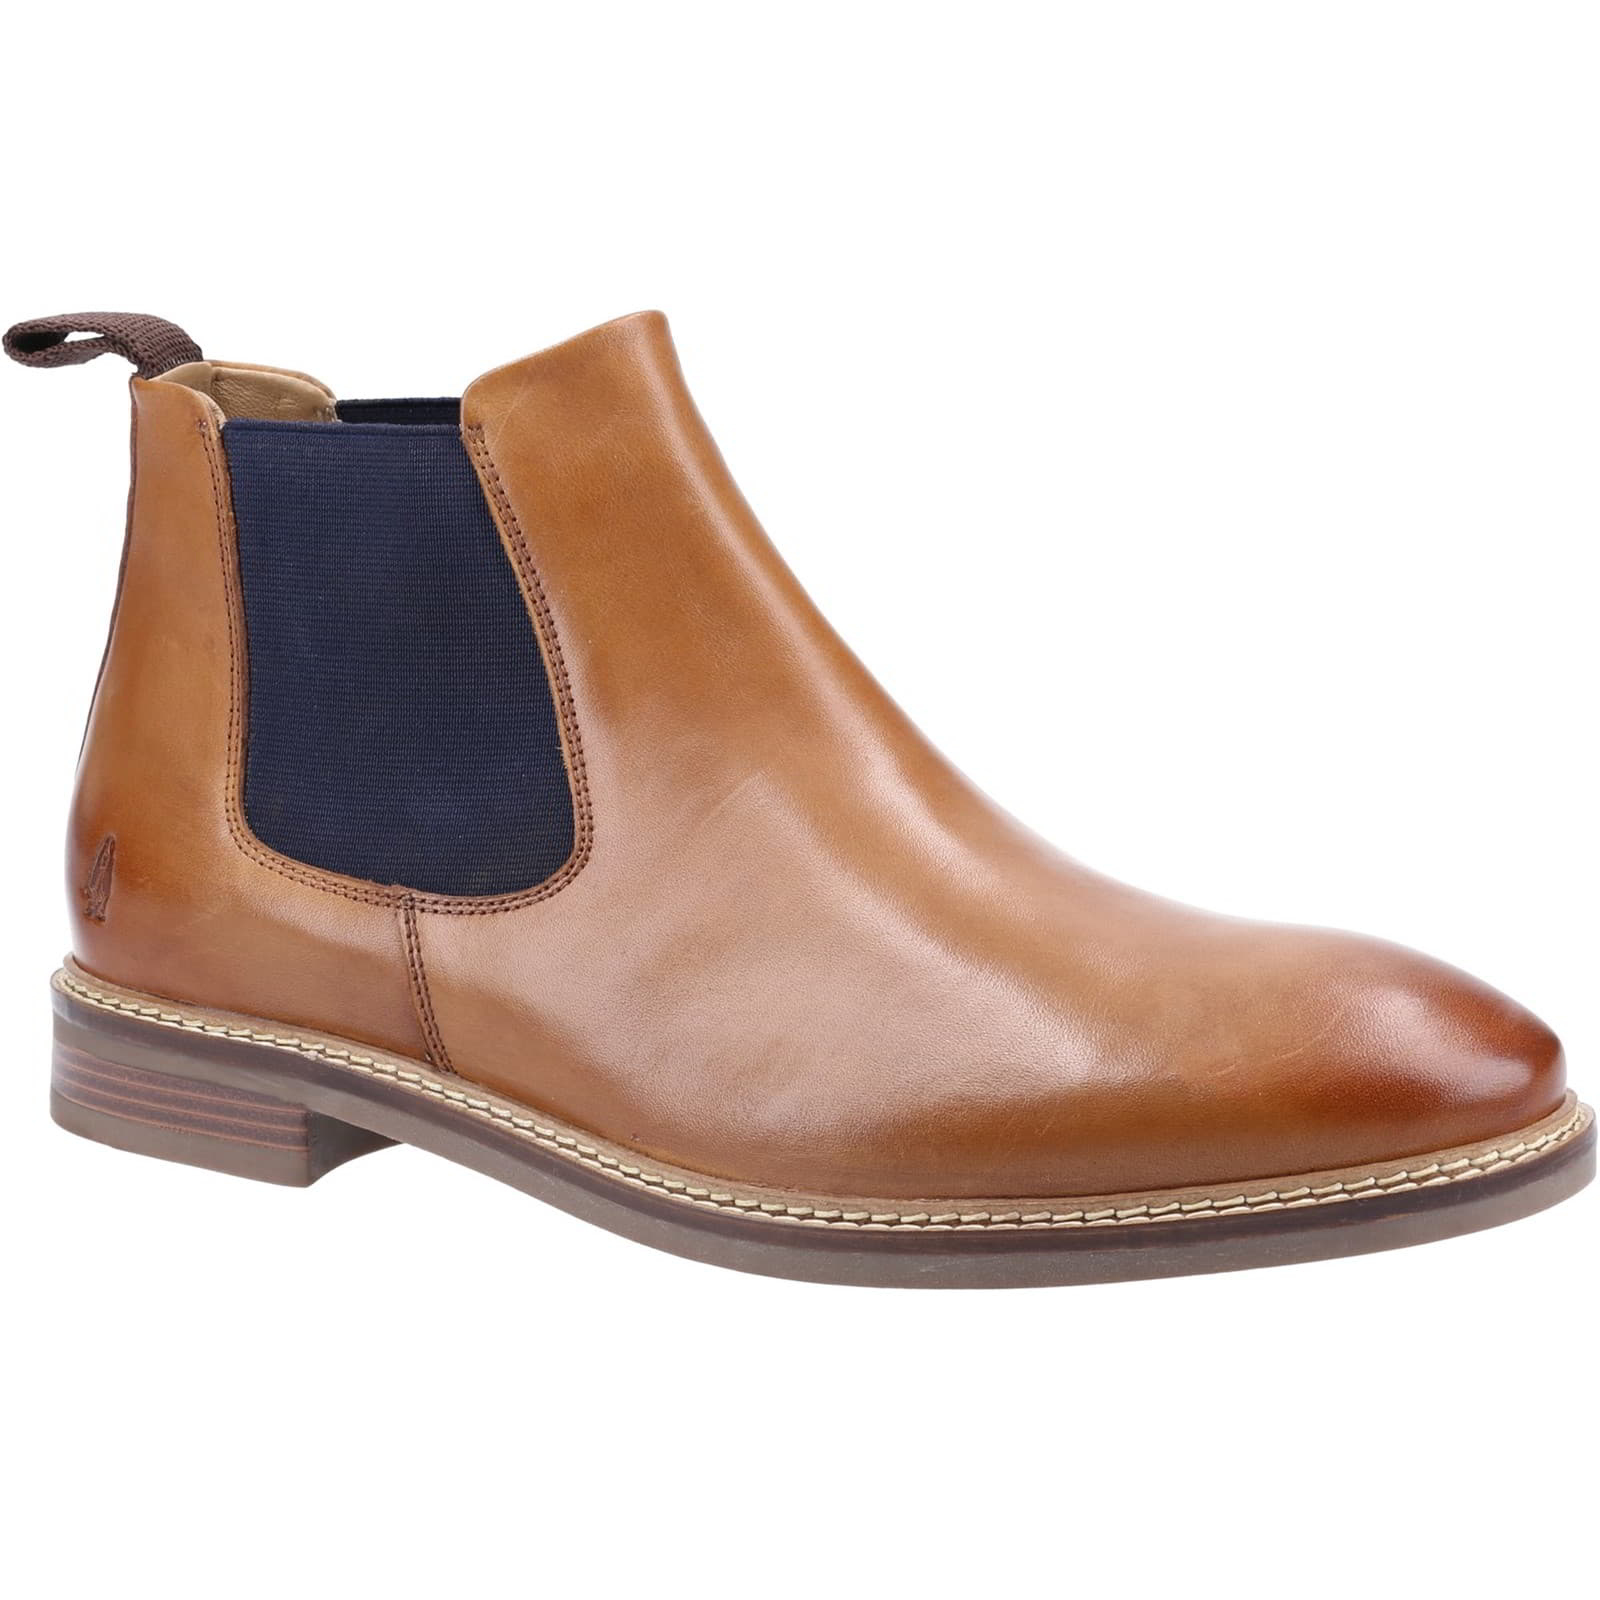 Hush Puppies Men's Blake Pull On Chelsea Ankle Boots - UK 7